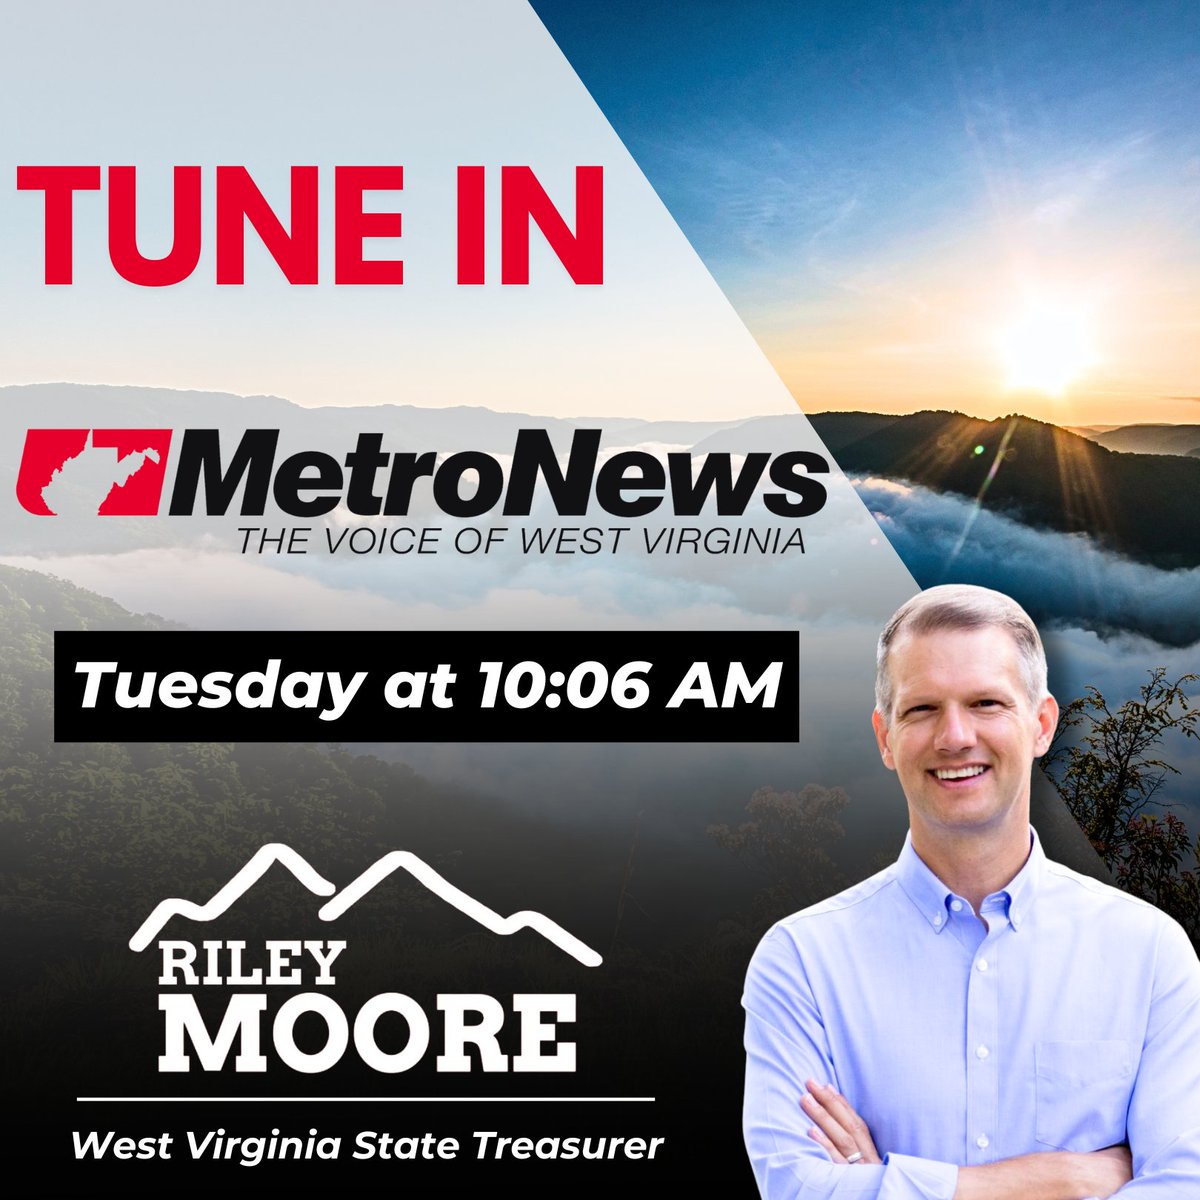 I'm excited to join @HoppyKercheval LIVE on @WVMetroNews Talkline at 10:06 AM!

I'll provide an update on my congressional campaign for #WV02 and discuss the great work we're doing at the State Treasurer's Office for the people of West Virginia.

Tune in! 🎙…